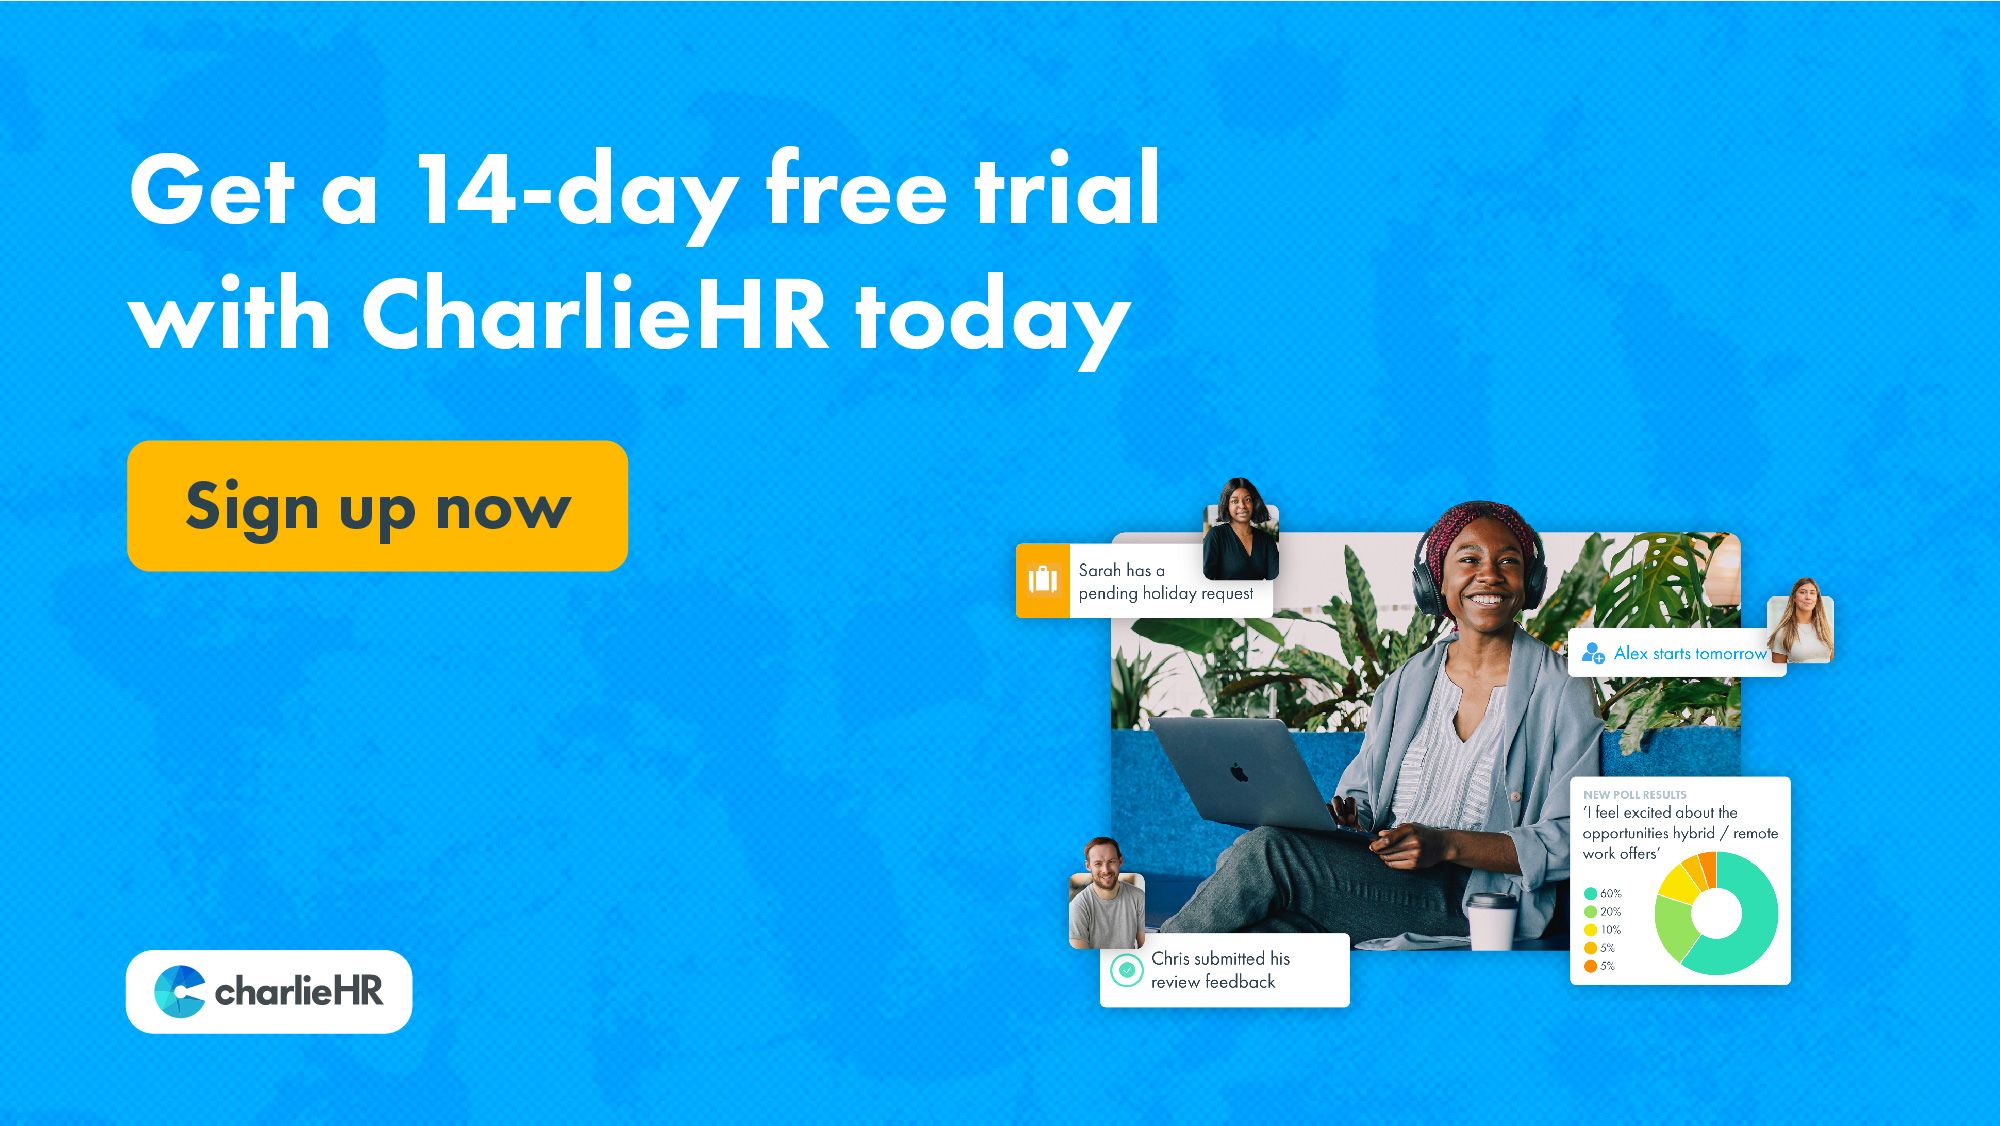 Click here to sign up for a 14 day free trial with CharlieHR